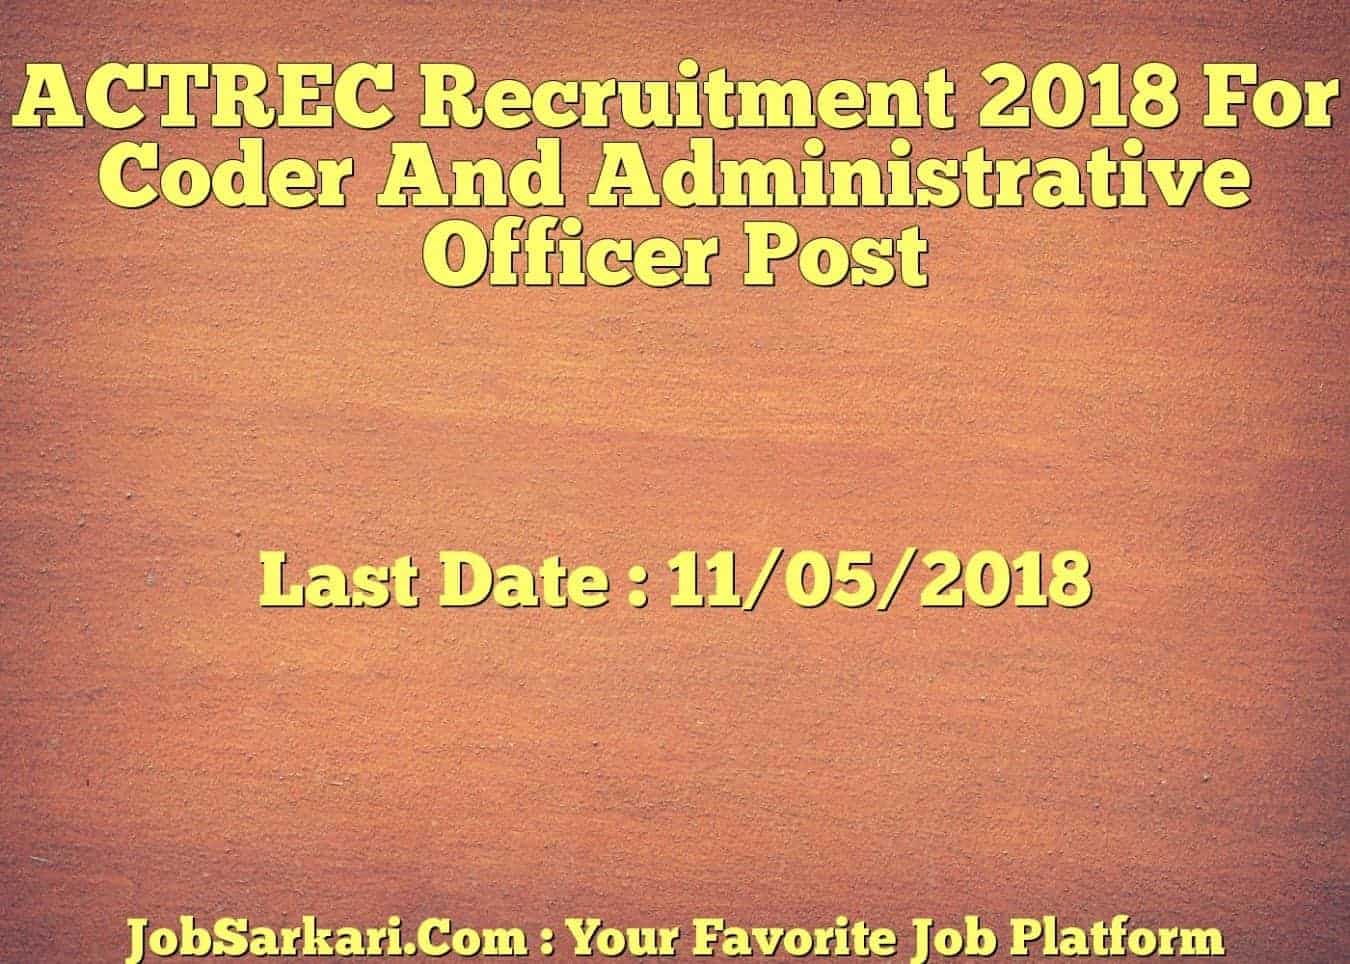 ACTREC Recruitment 2018 For Coder And Administrative Officer Post